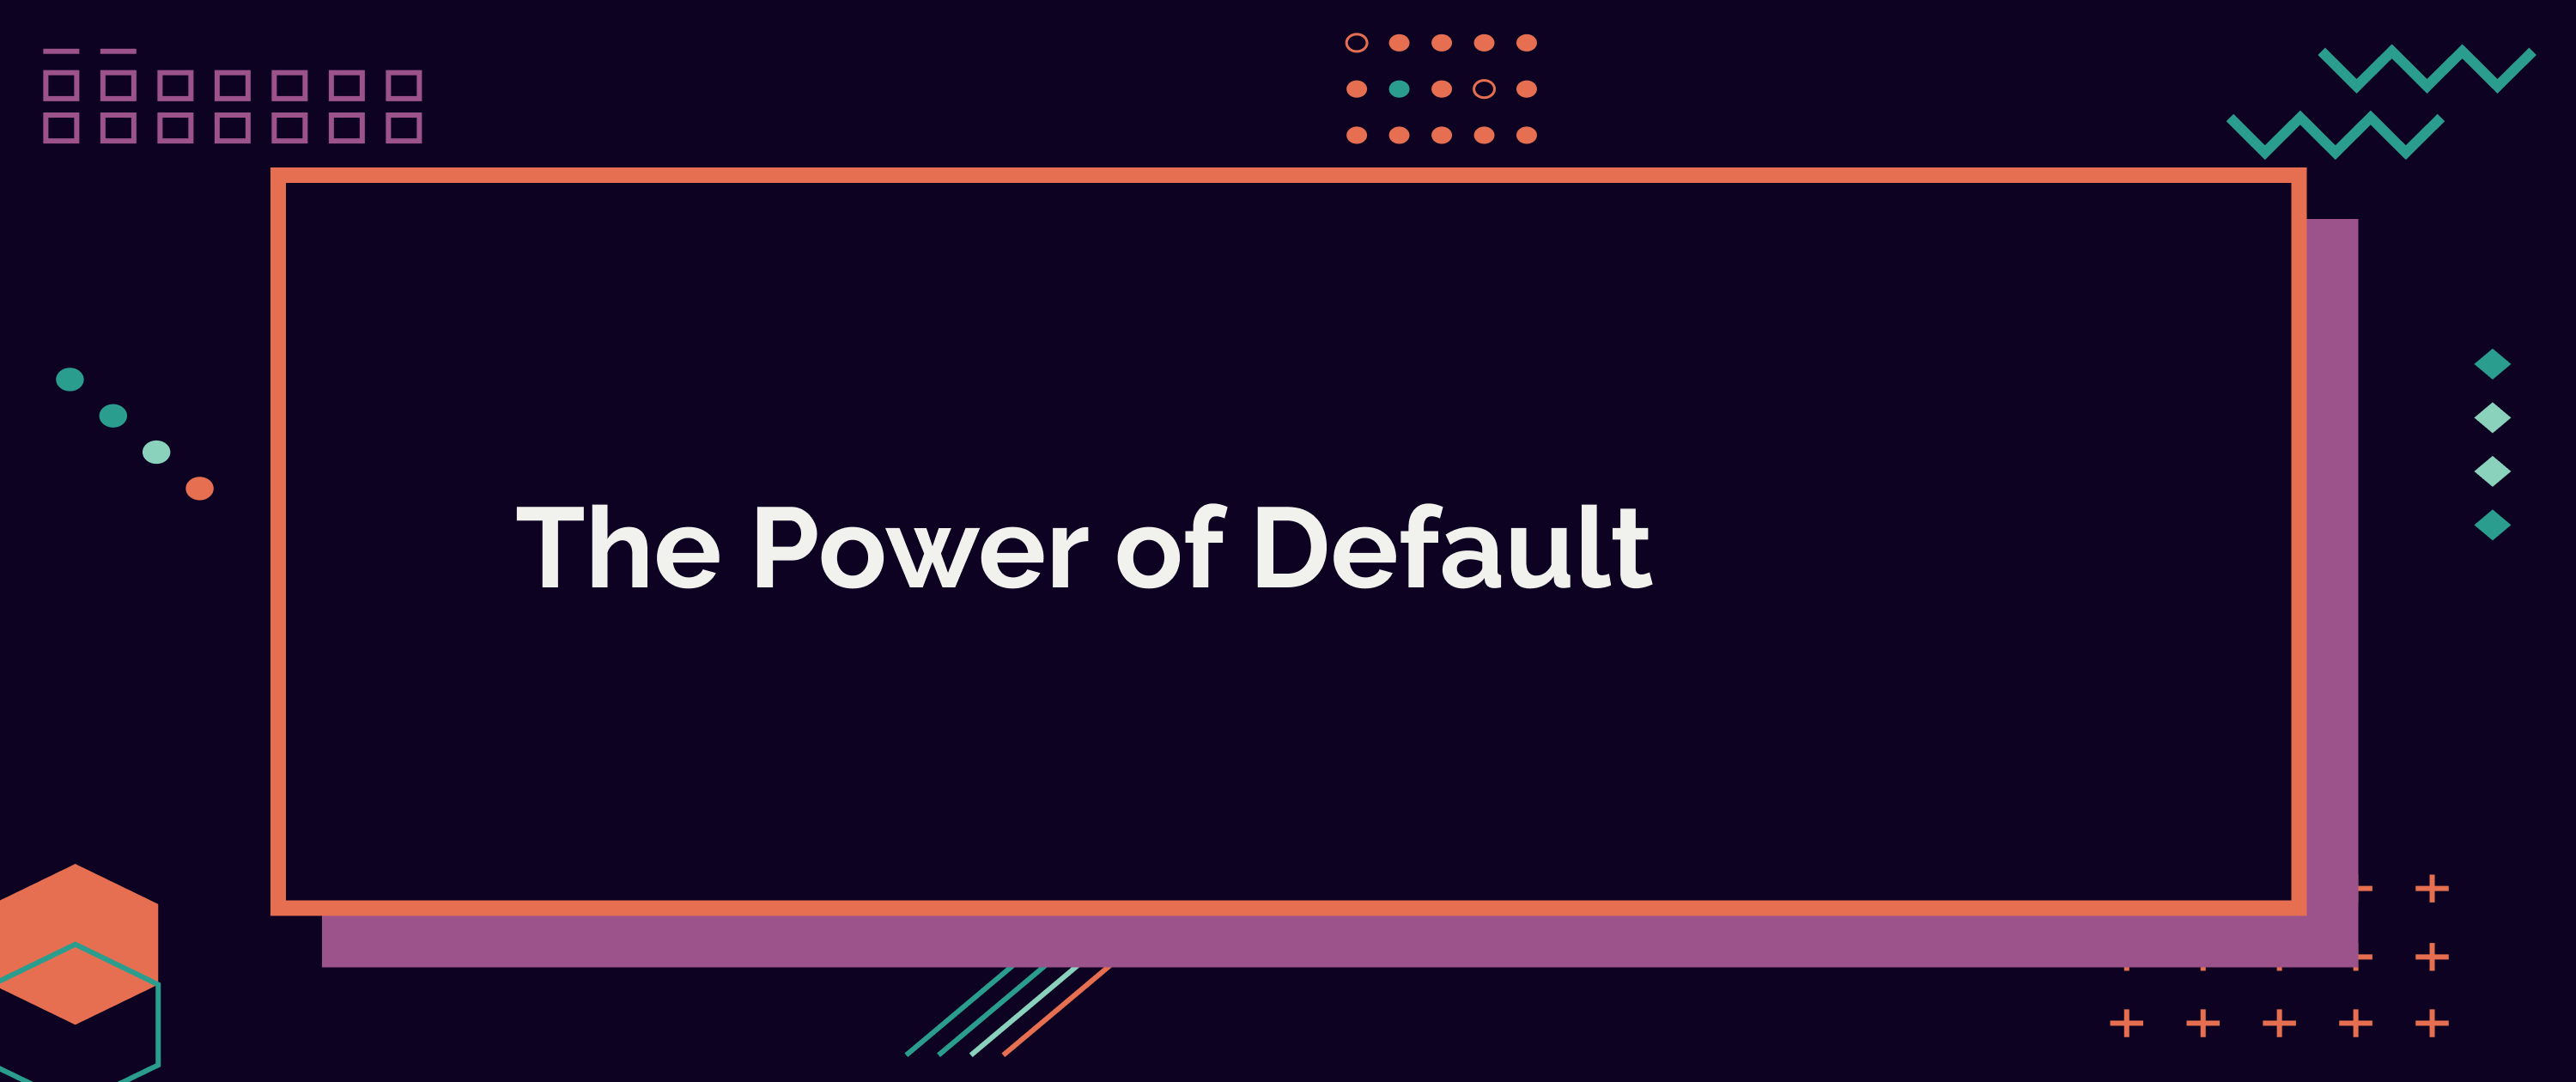 The Power of Default